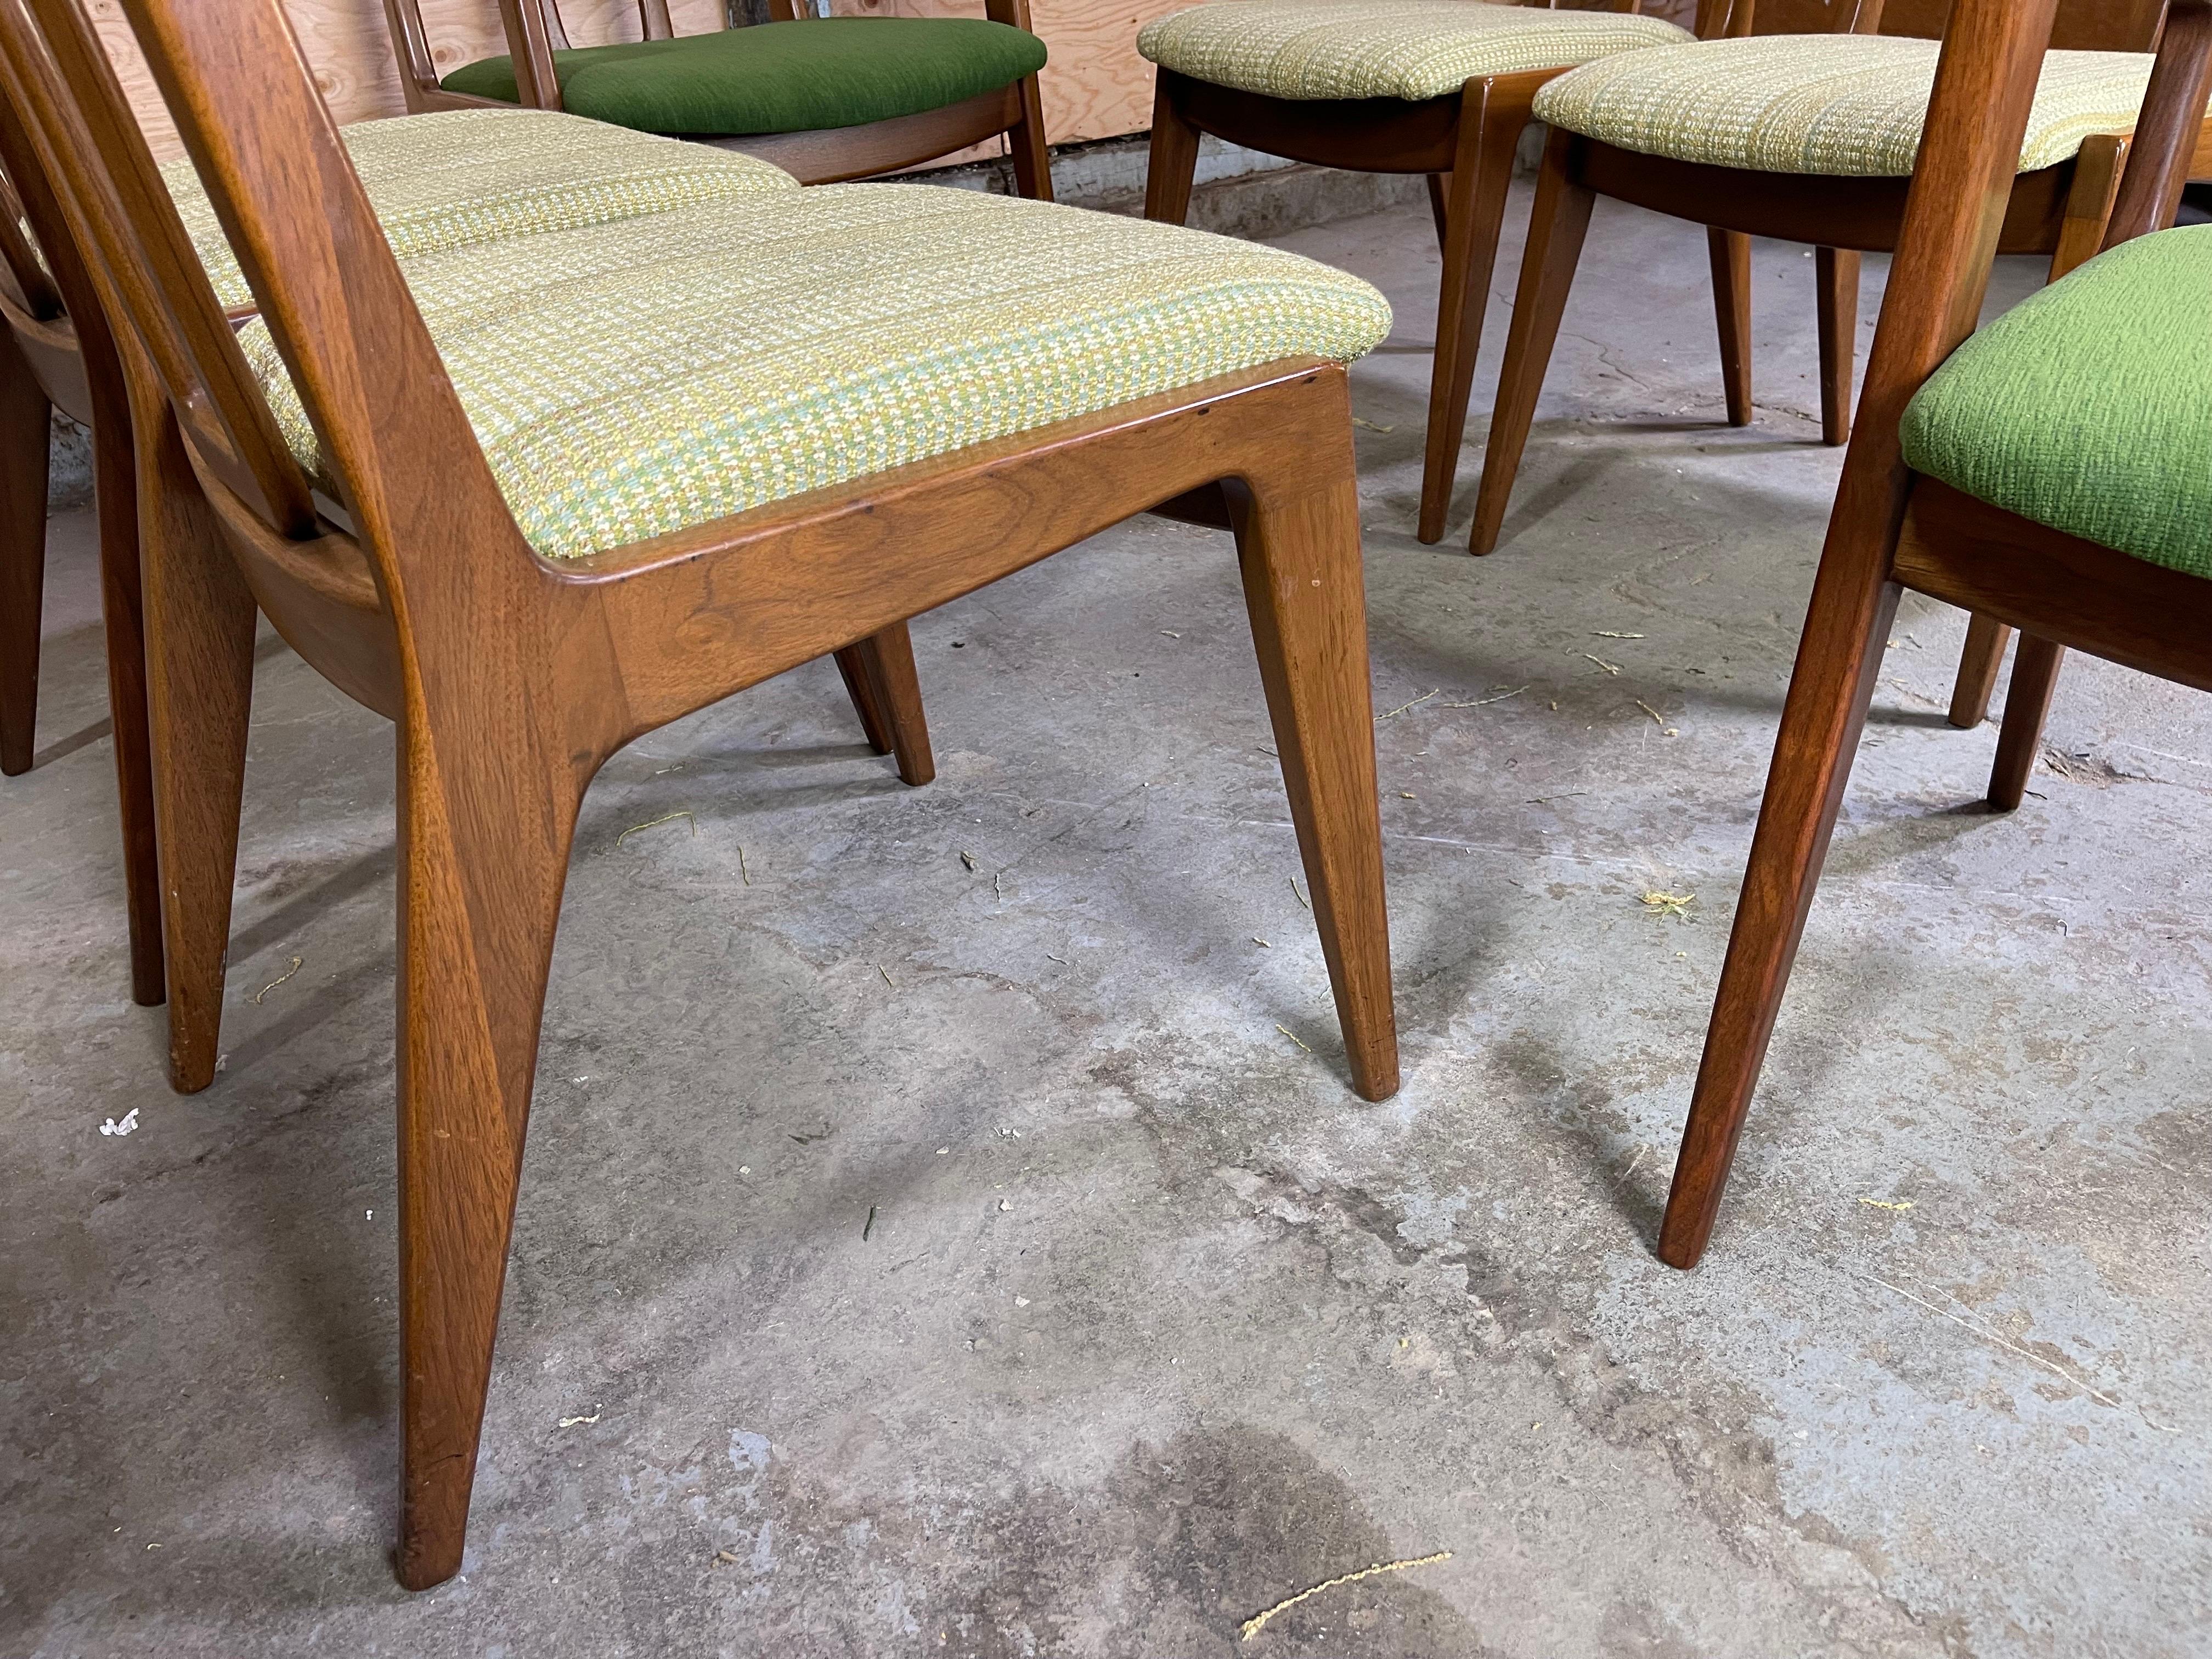 Mid-20th Century Mid-Century Modern Dining Chairs After James Mont Six in Walnut